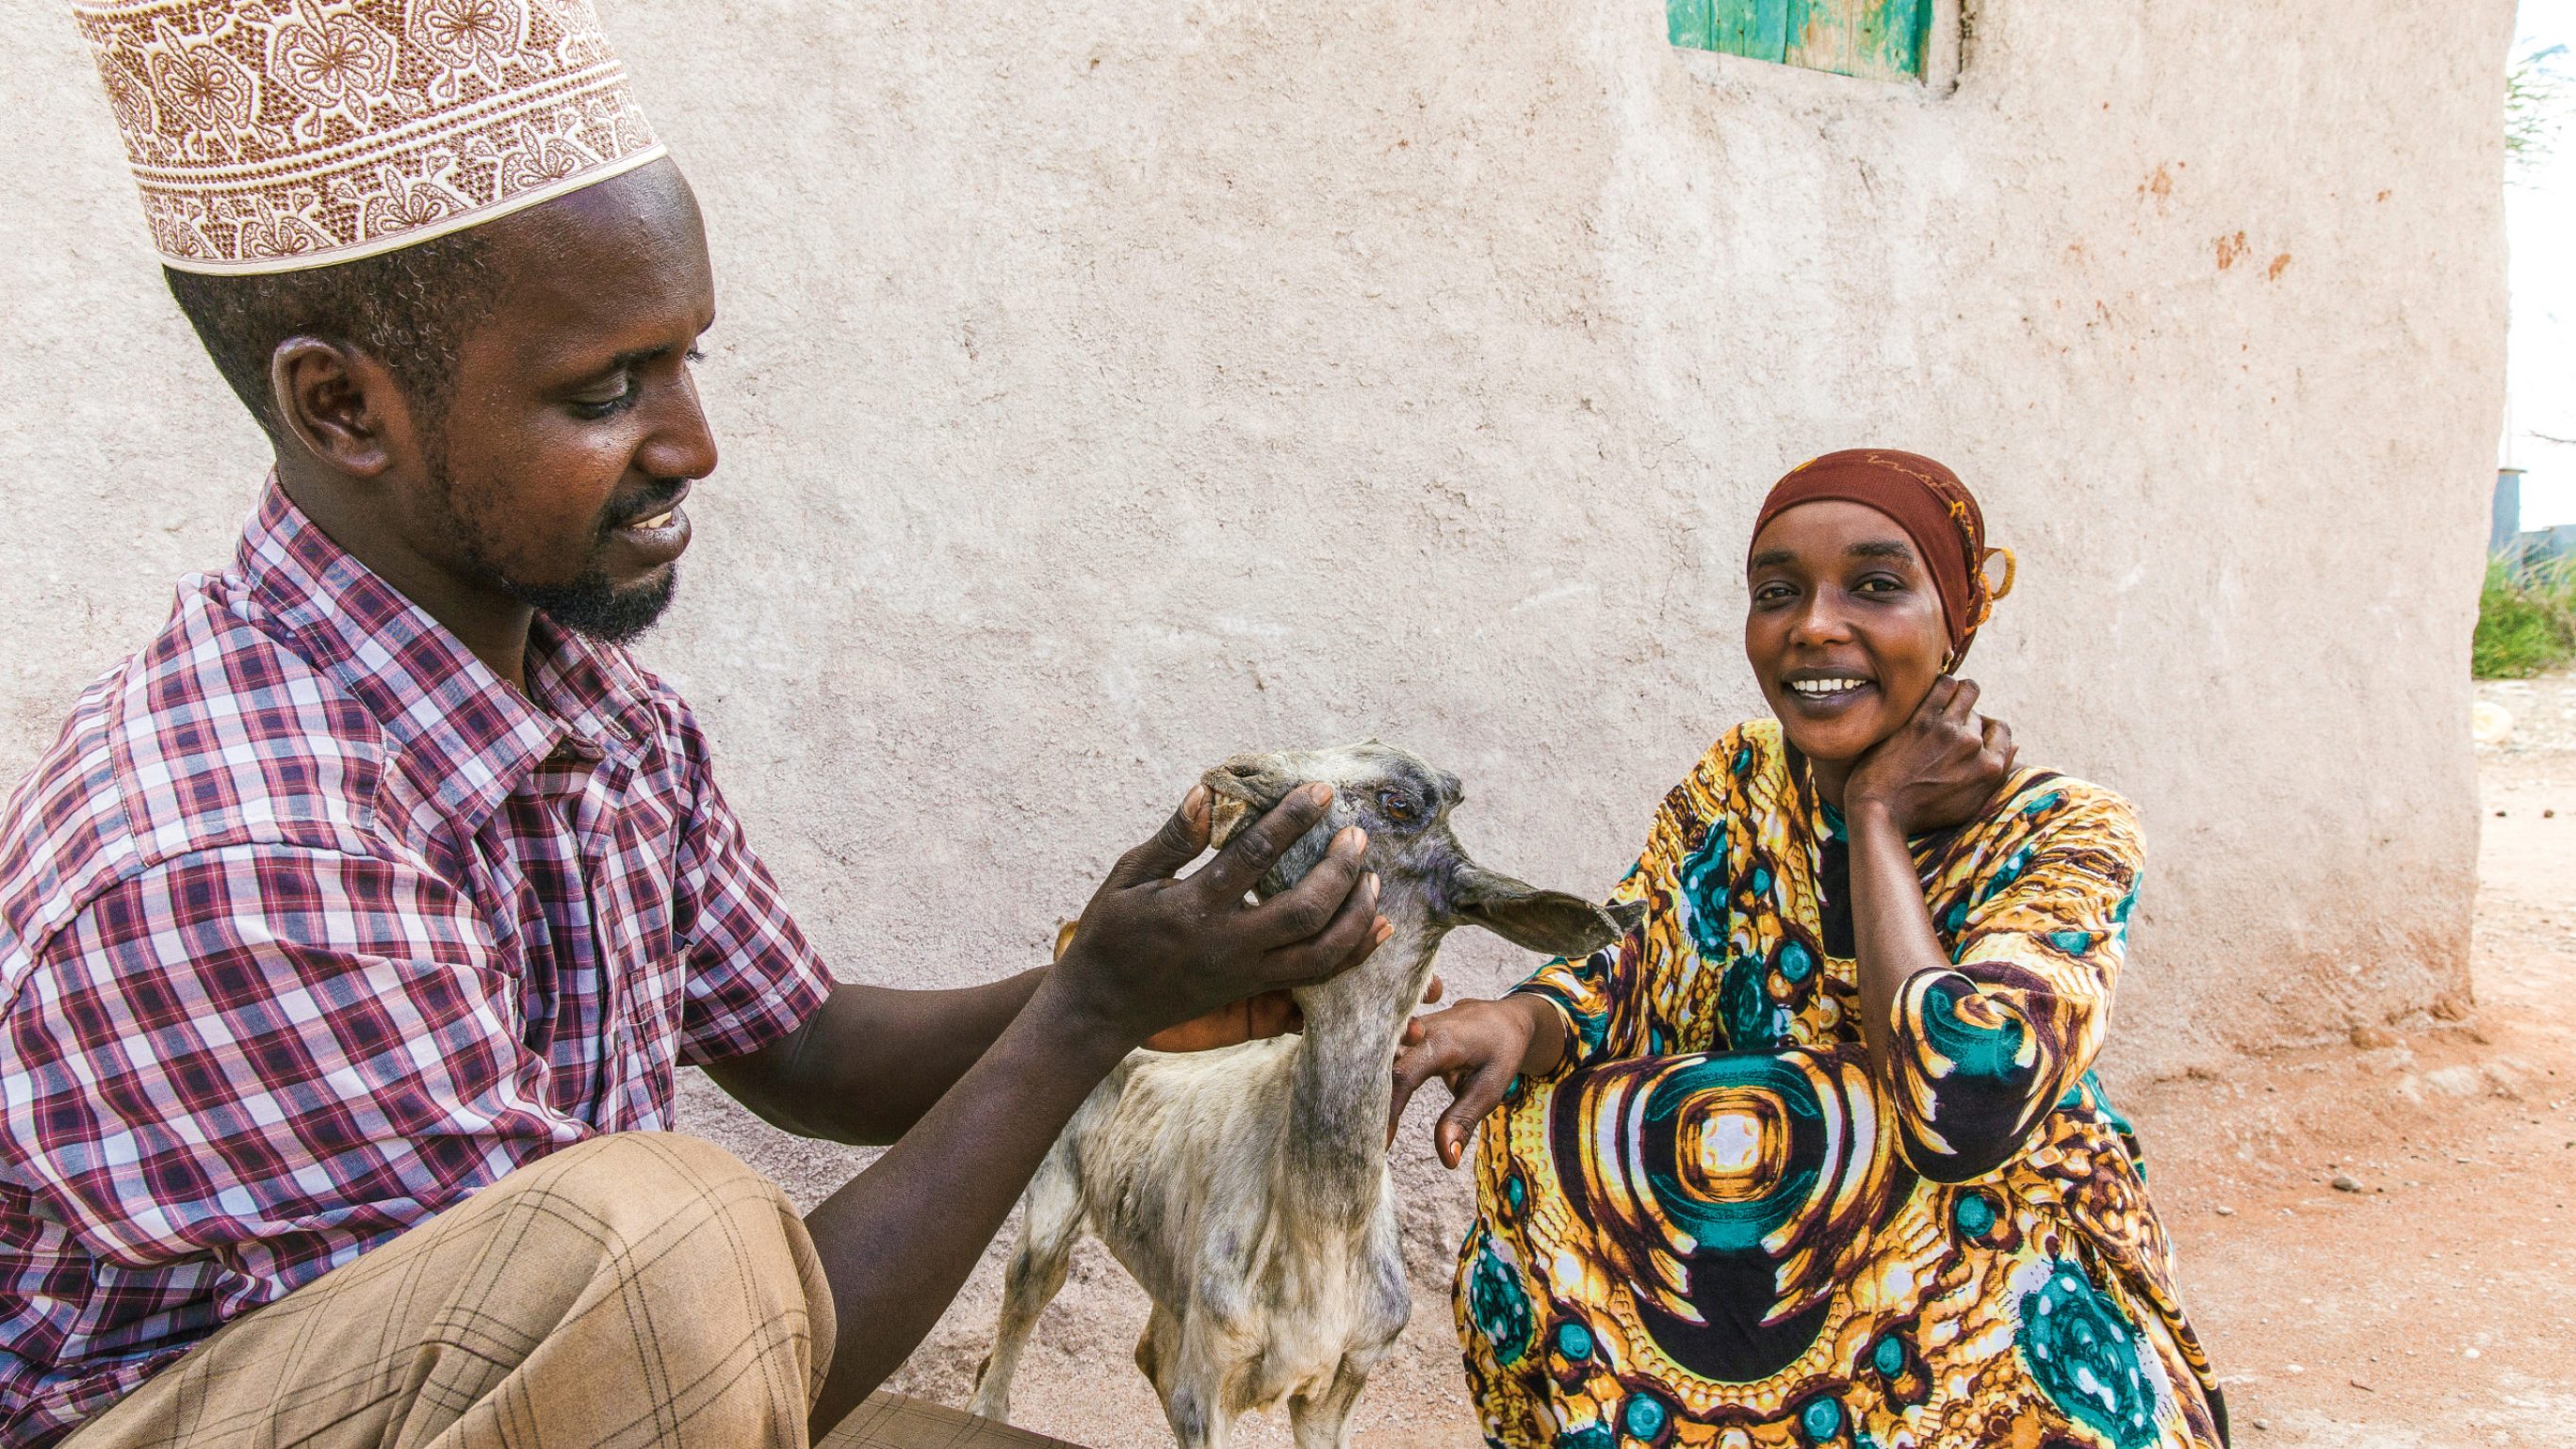 Muktar Kadubada, CDR in Boji examines a young goat kid. He diagnoses a serious worm infestation for which drugs are needed.